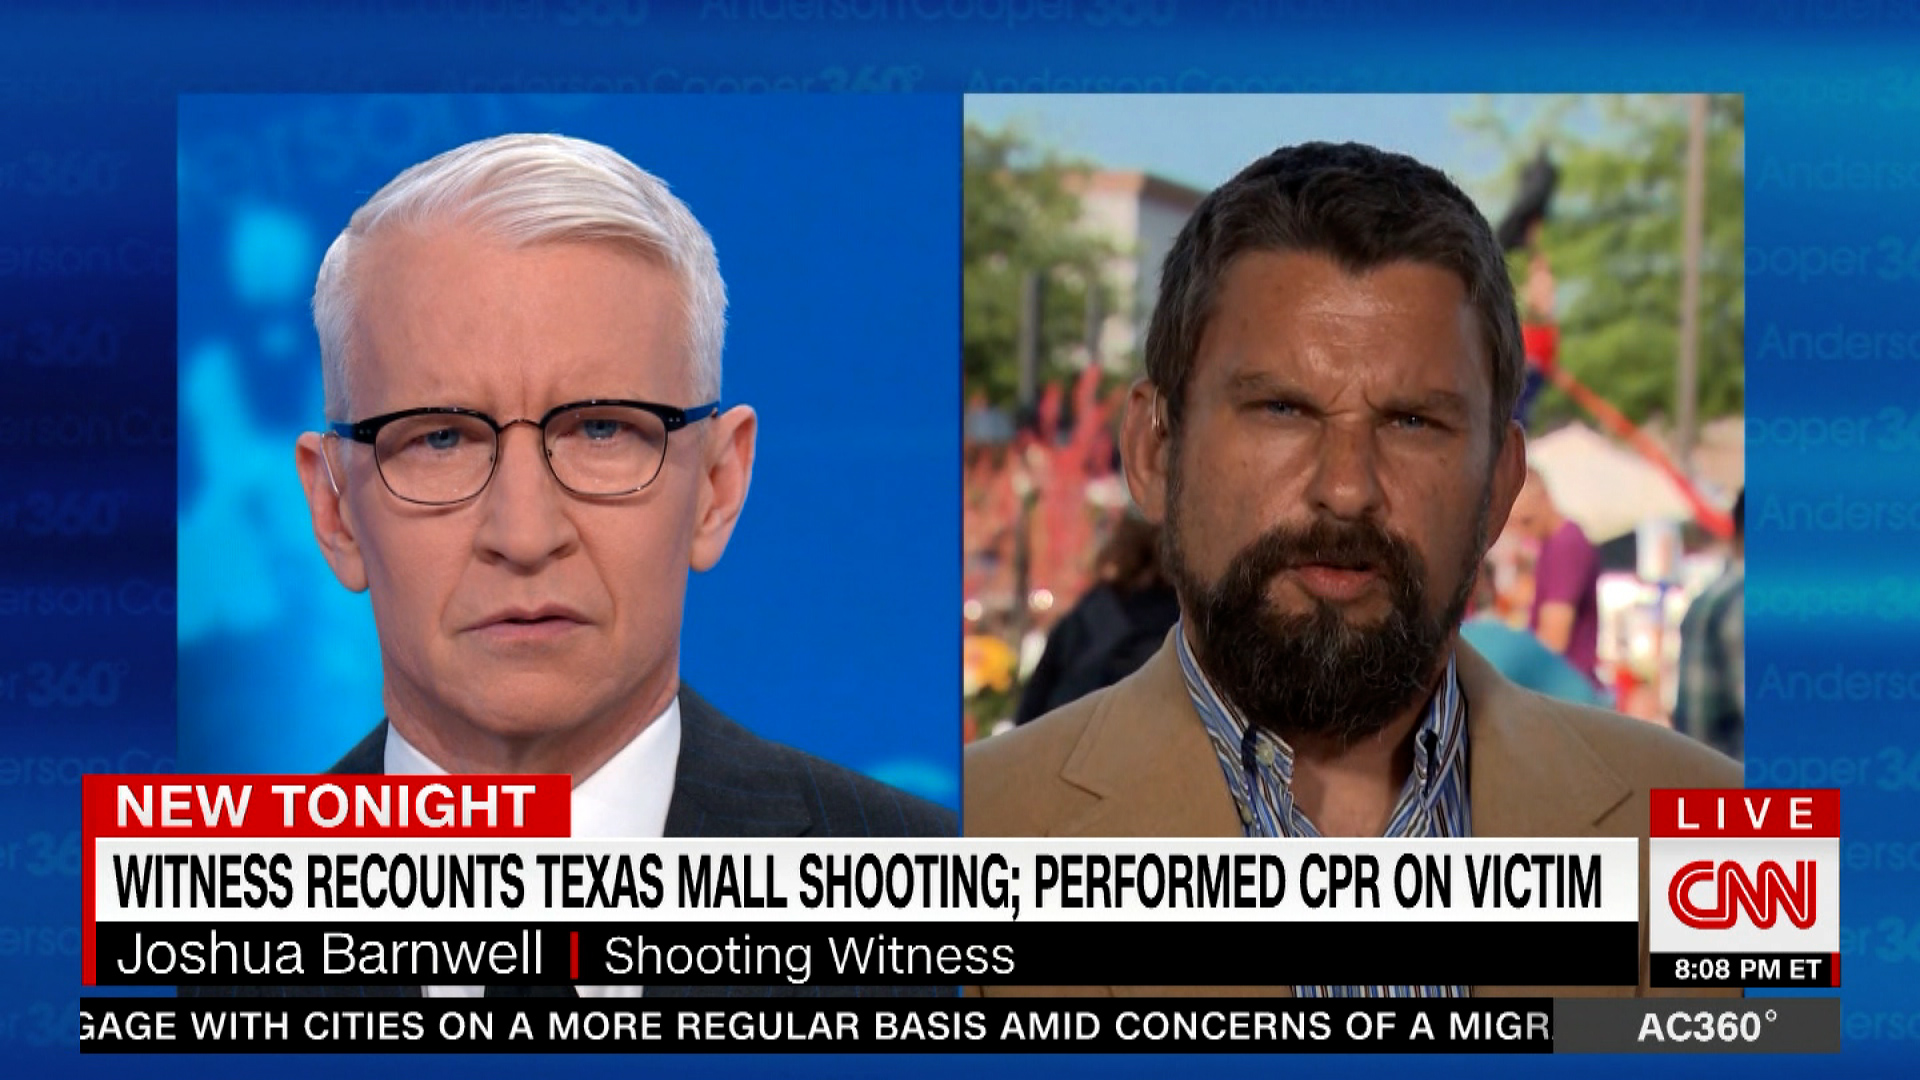 Joshua Barnwell, a Navy combat veteran, describes the horrific scene he witnessed during the mass shooting at an Allen, Texas, outlet mall to CNN's Anderson Cooper. 